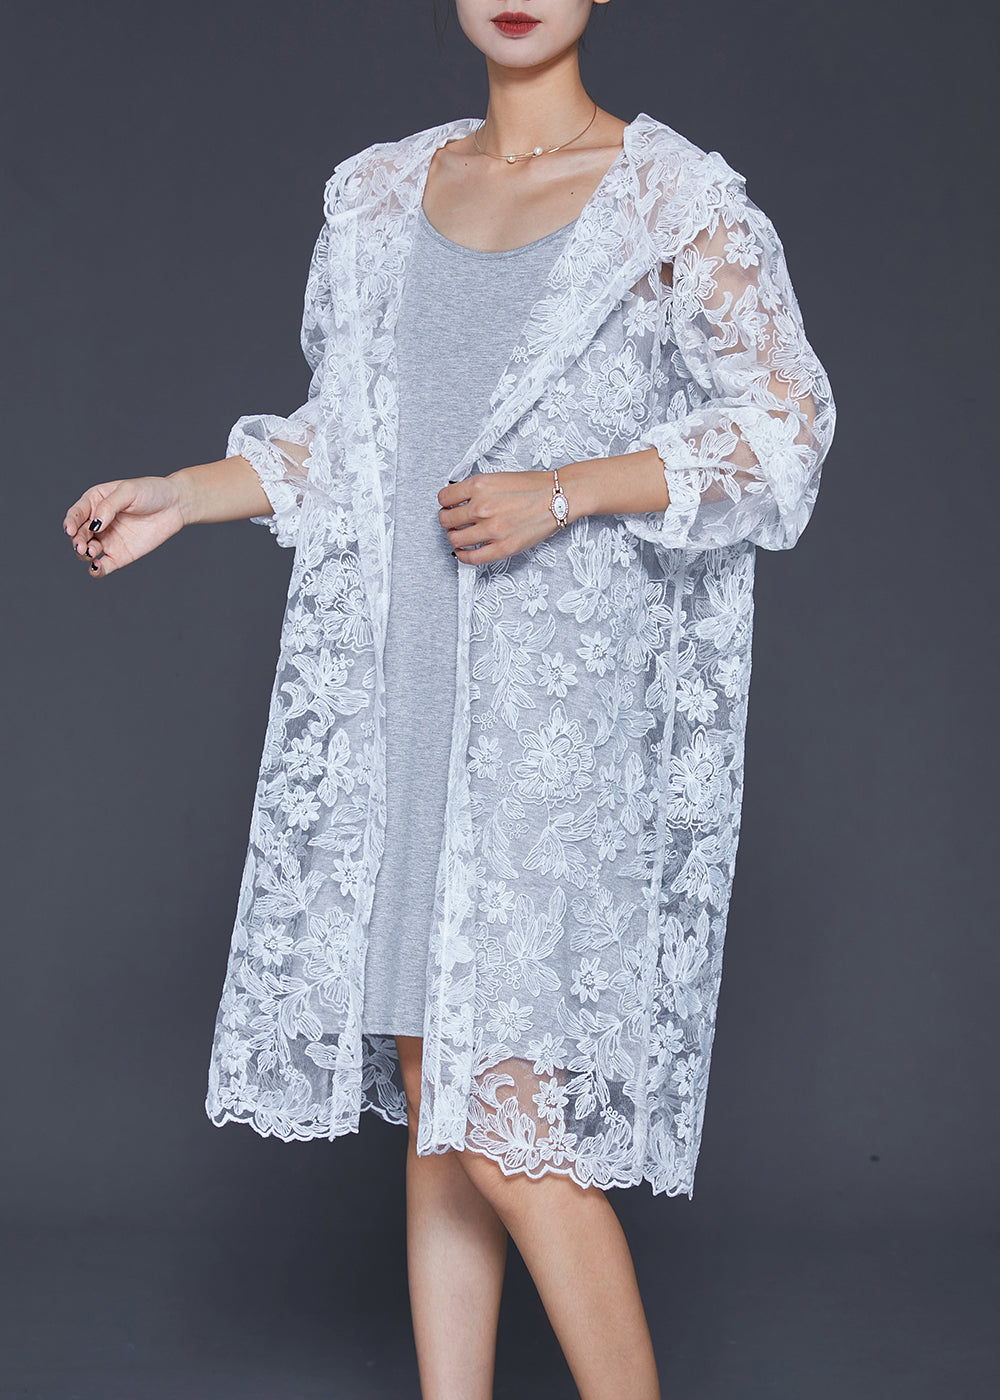 Italian White Embroideried Hollow Out Lace UPF 50+ Cardigan Summer